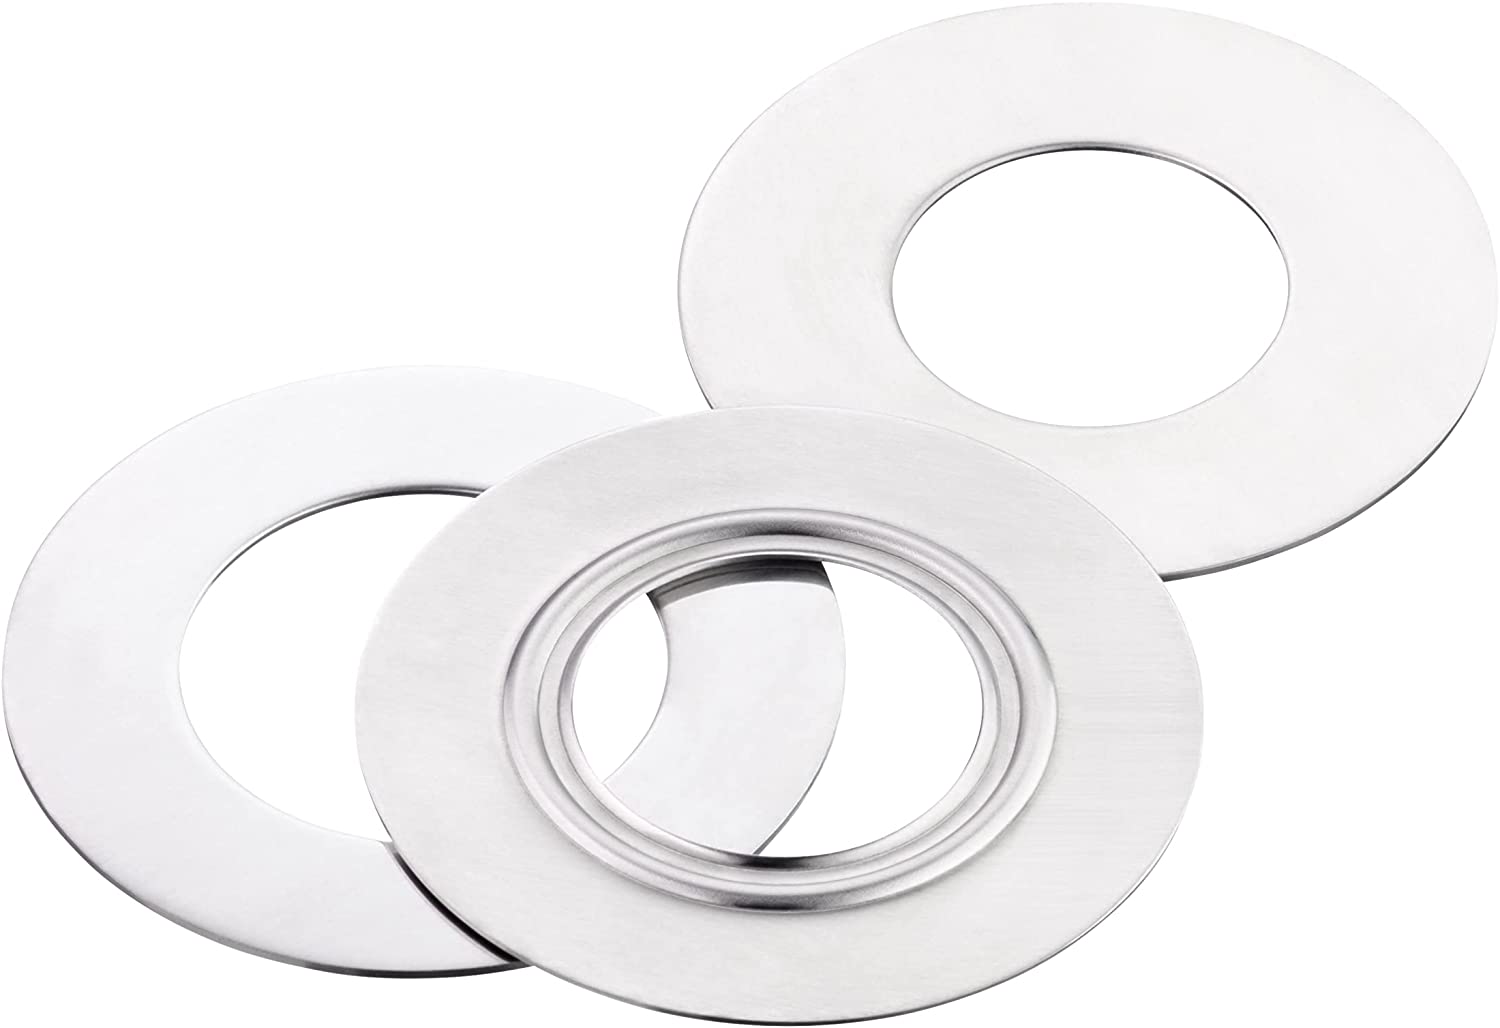 Kaiser 3-Piece Stainless Steel Grommet Adapter Discs for Cream/Pastry Press Fits All Nozzle Sizes